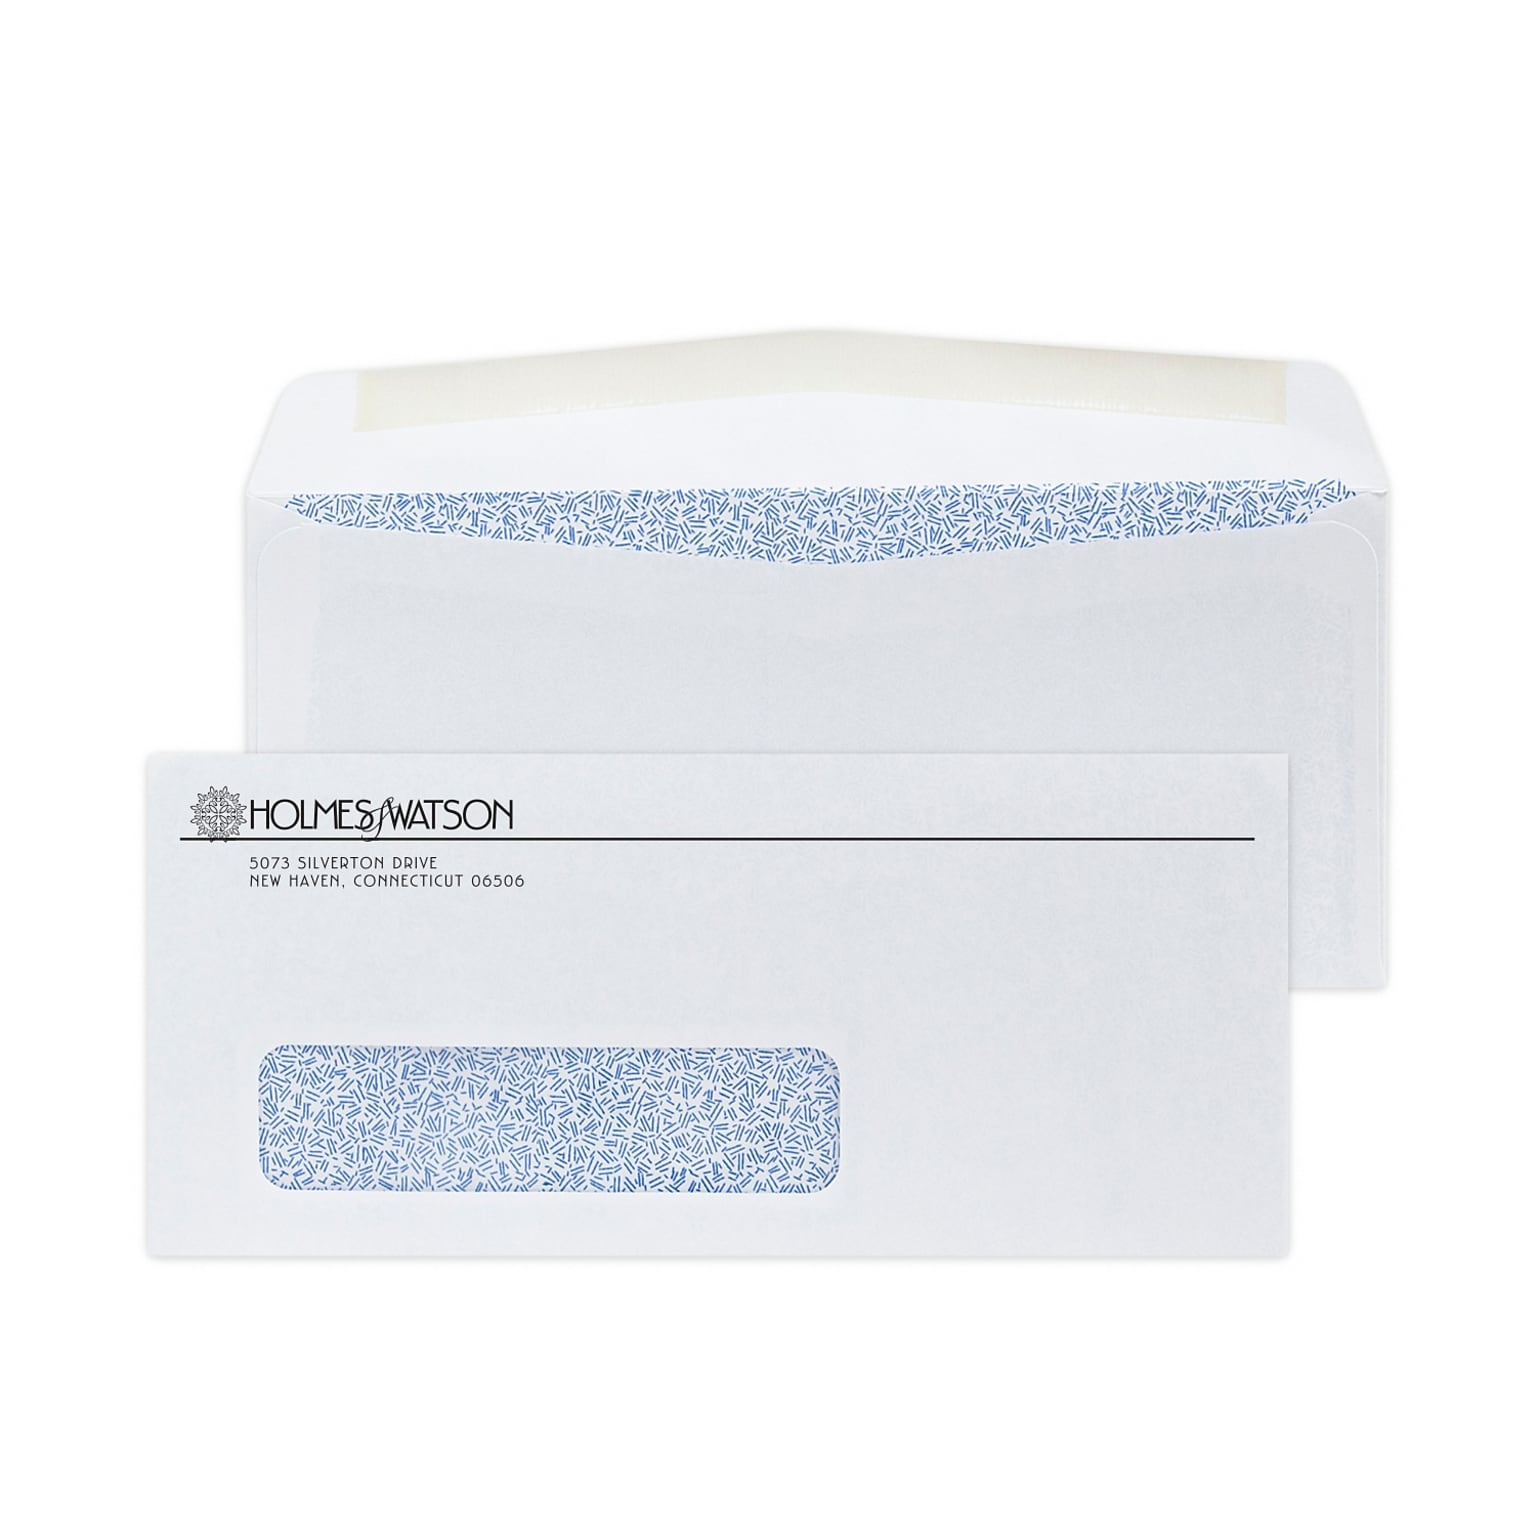 Custom #9 Window Envelopes with Security Tint, 3 7/8 x 8 7/8, 24# White Wove, 1 Standard Ink, 250 / Pack